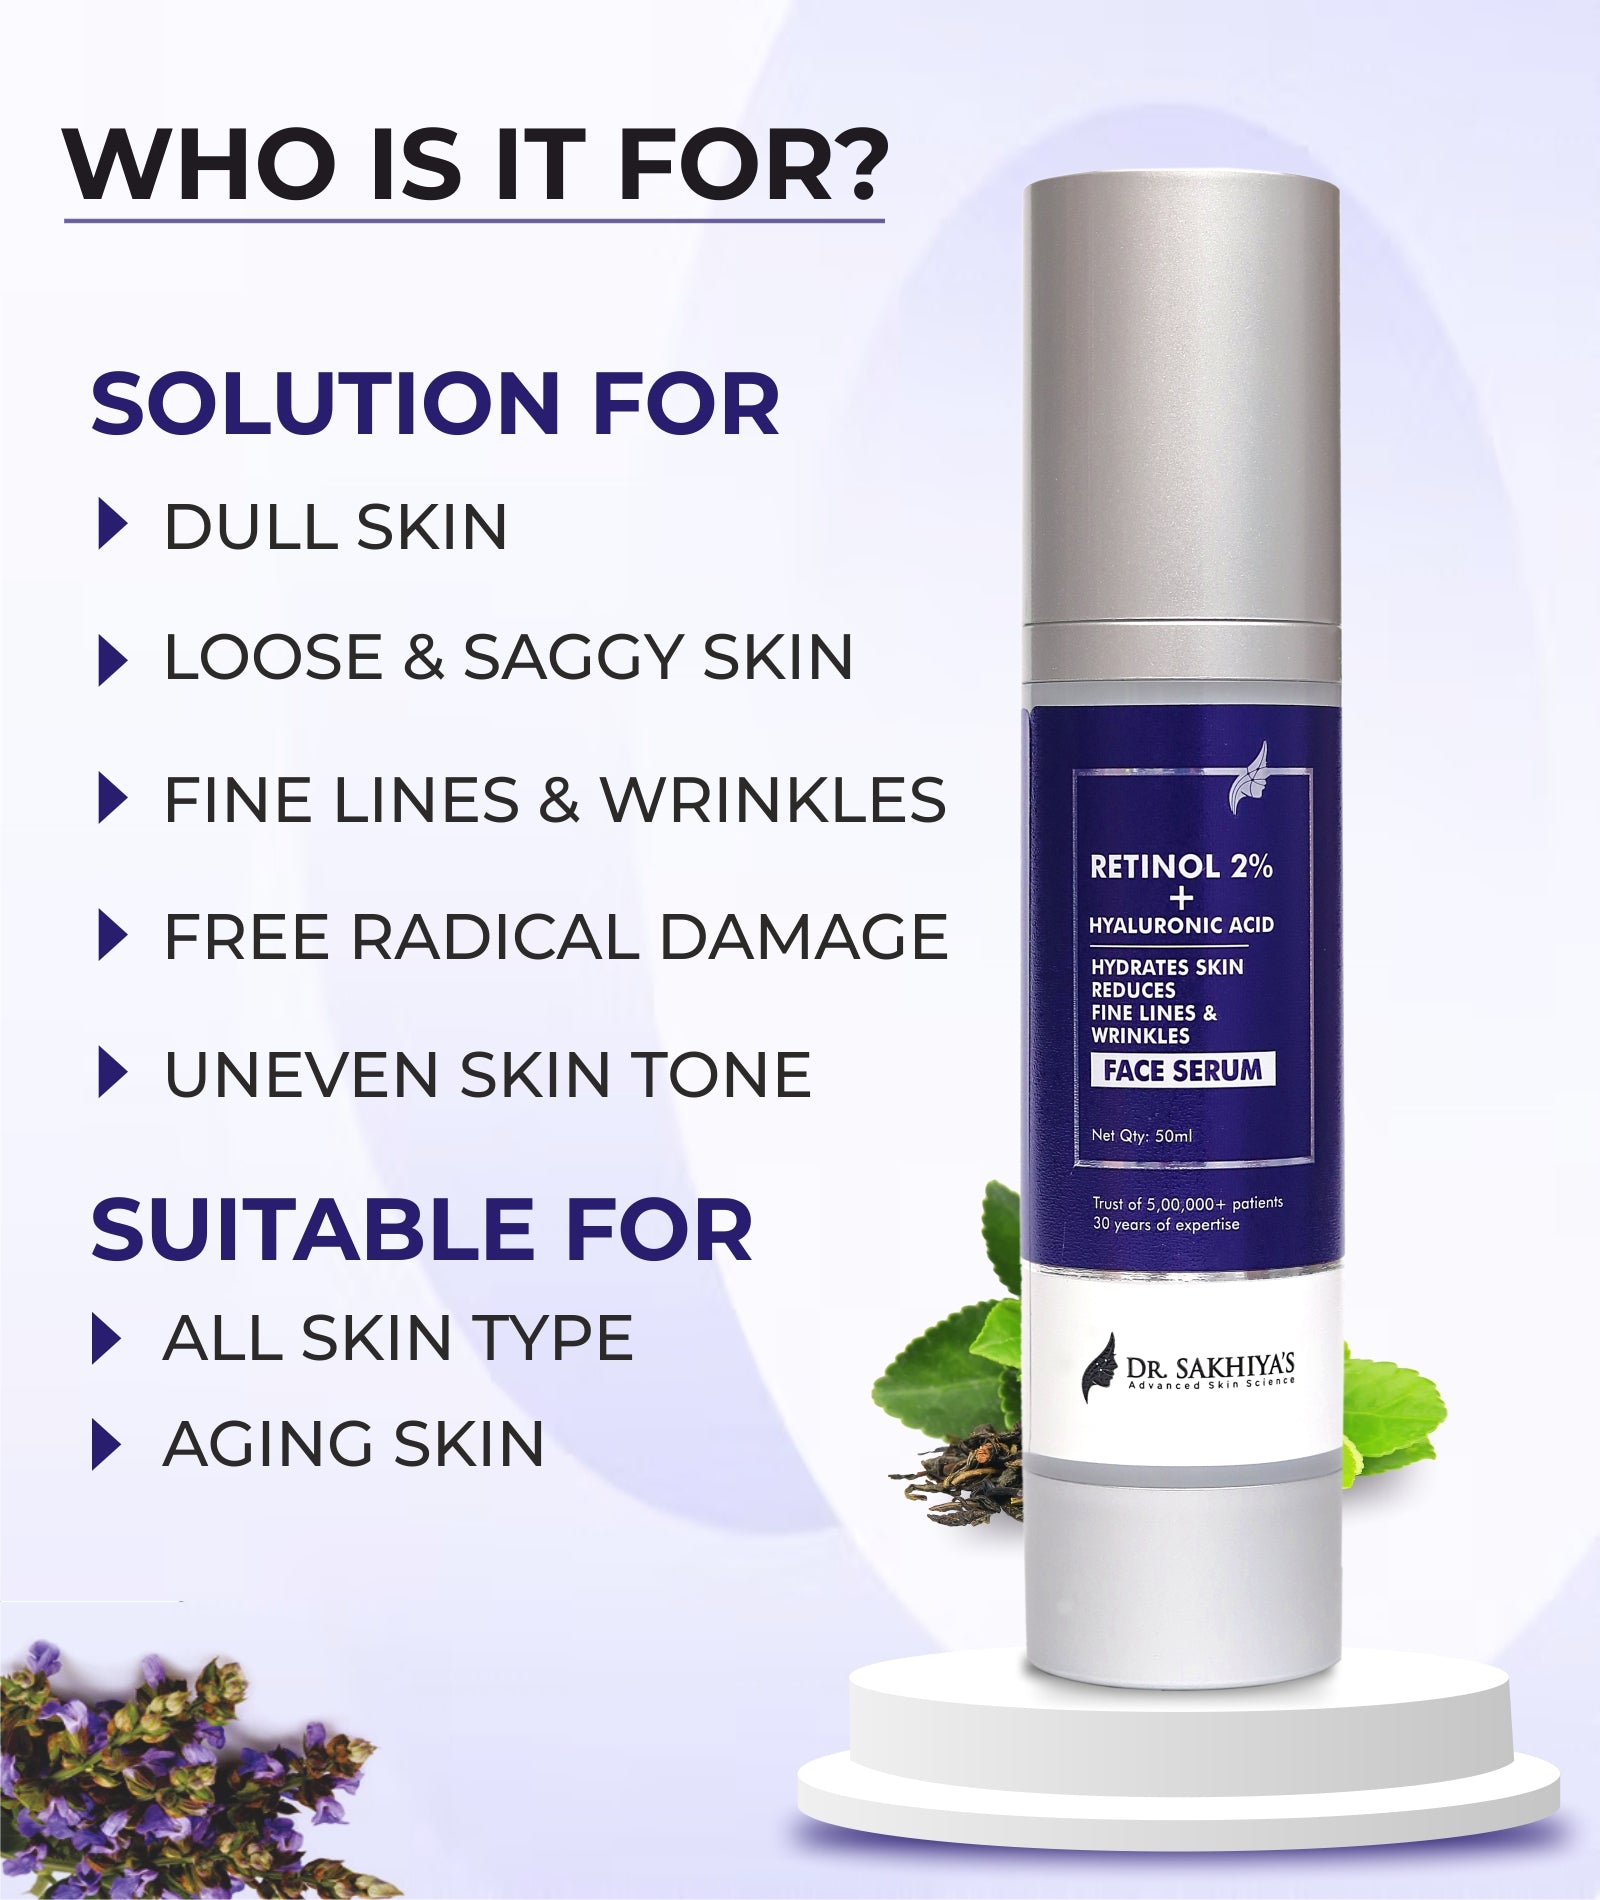 Treat Your Uneven Skin Tone With This Retinol Face Serum, Suitable For All Types Of Skin